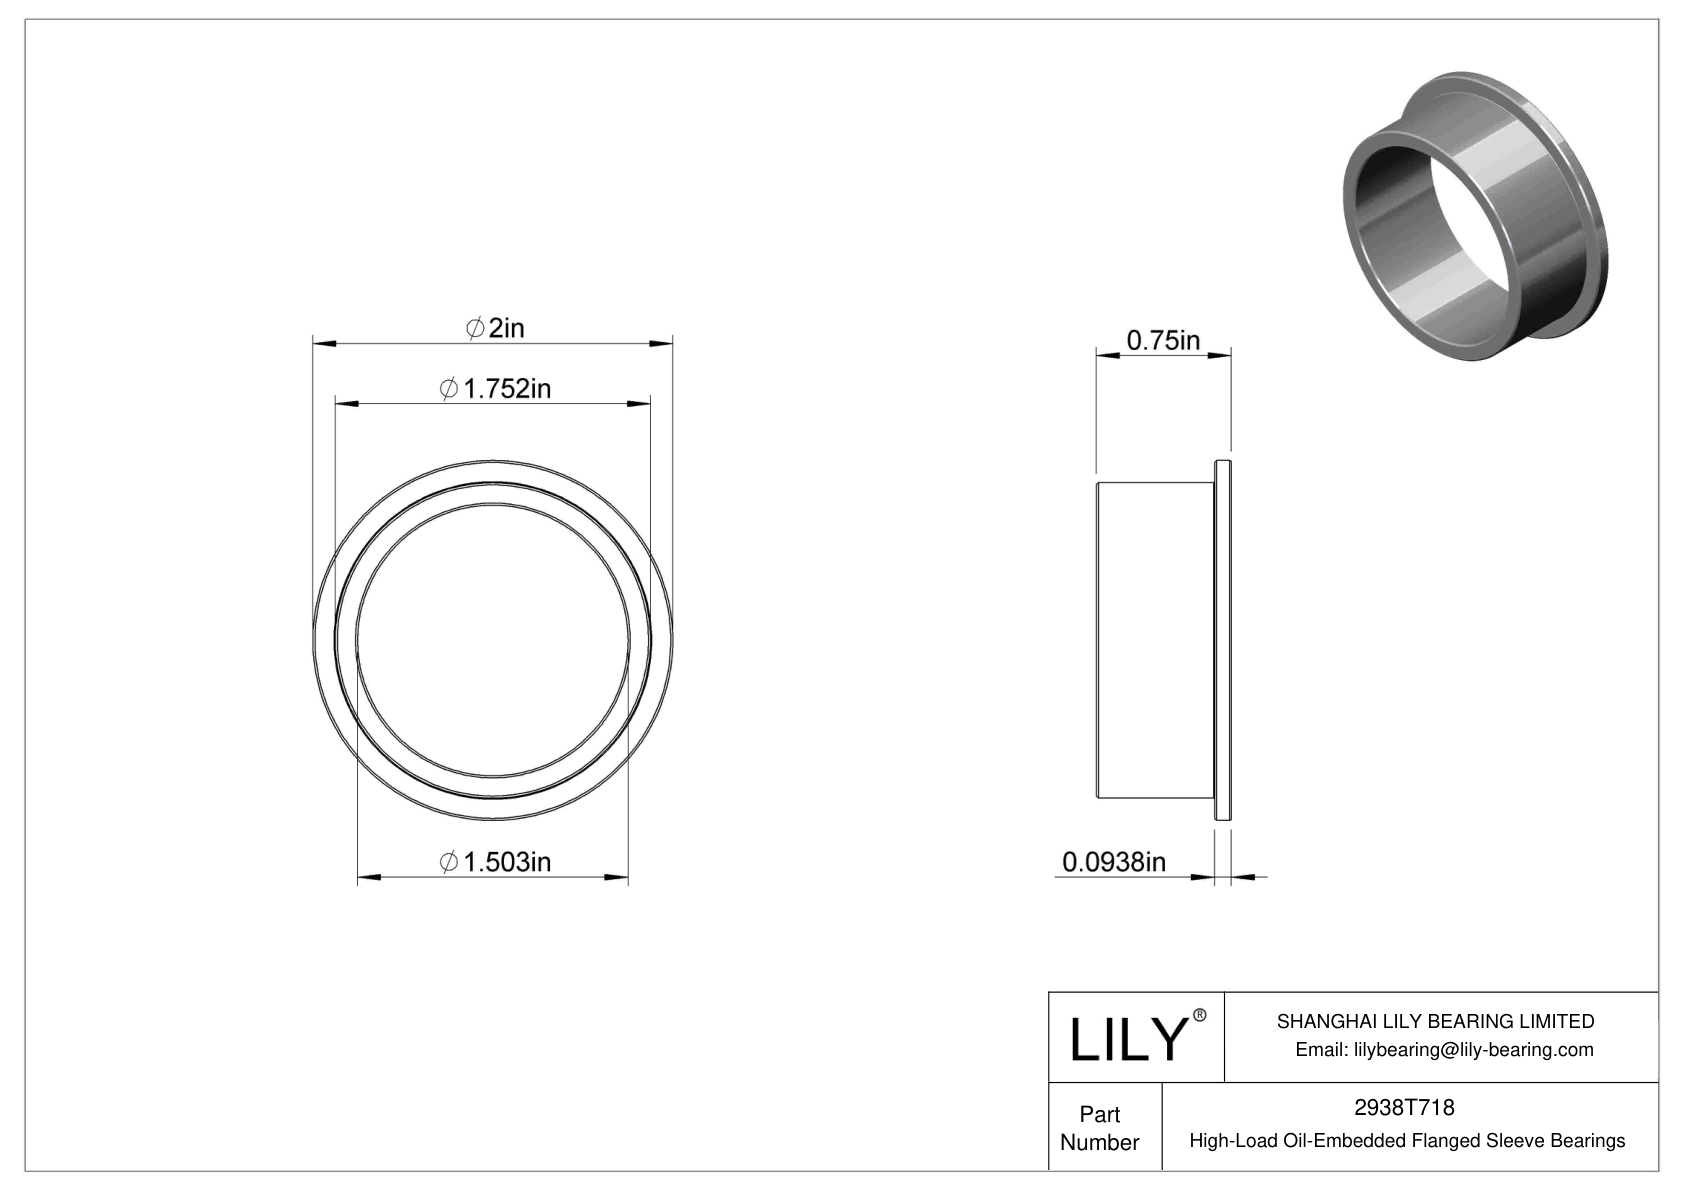 CJDITHBI High-Load Oil-Embedded Flanged Sleeve Bearings cad drawing